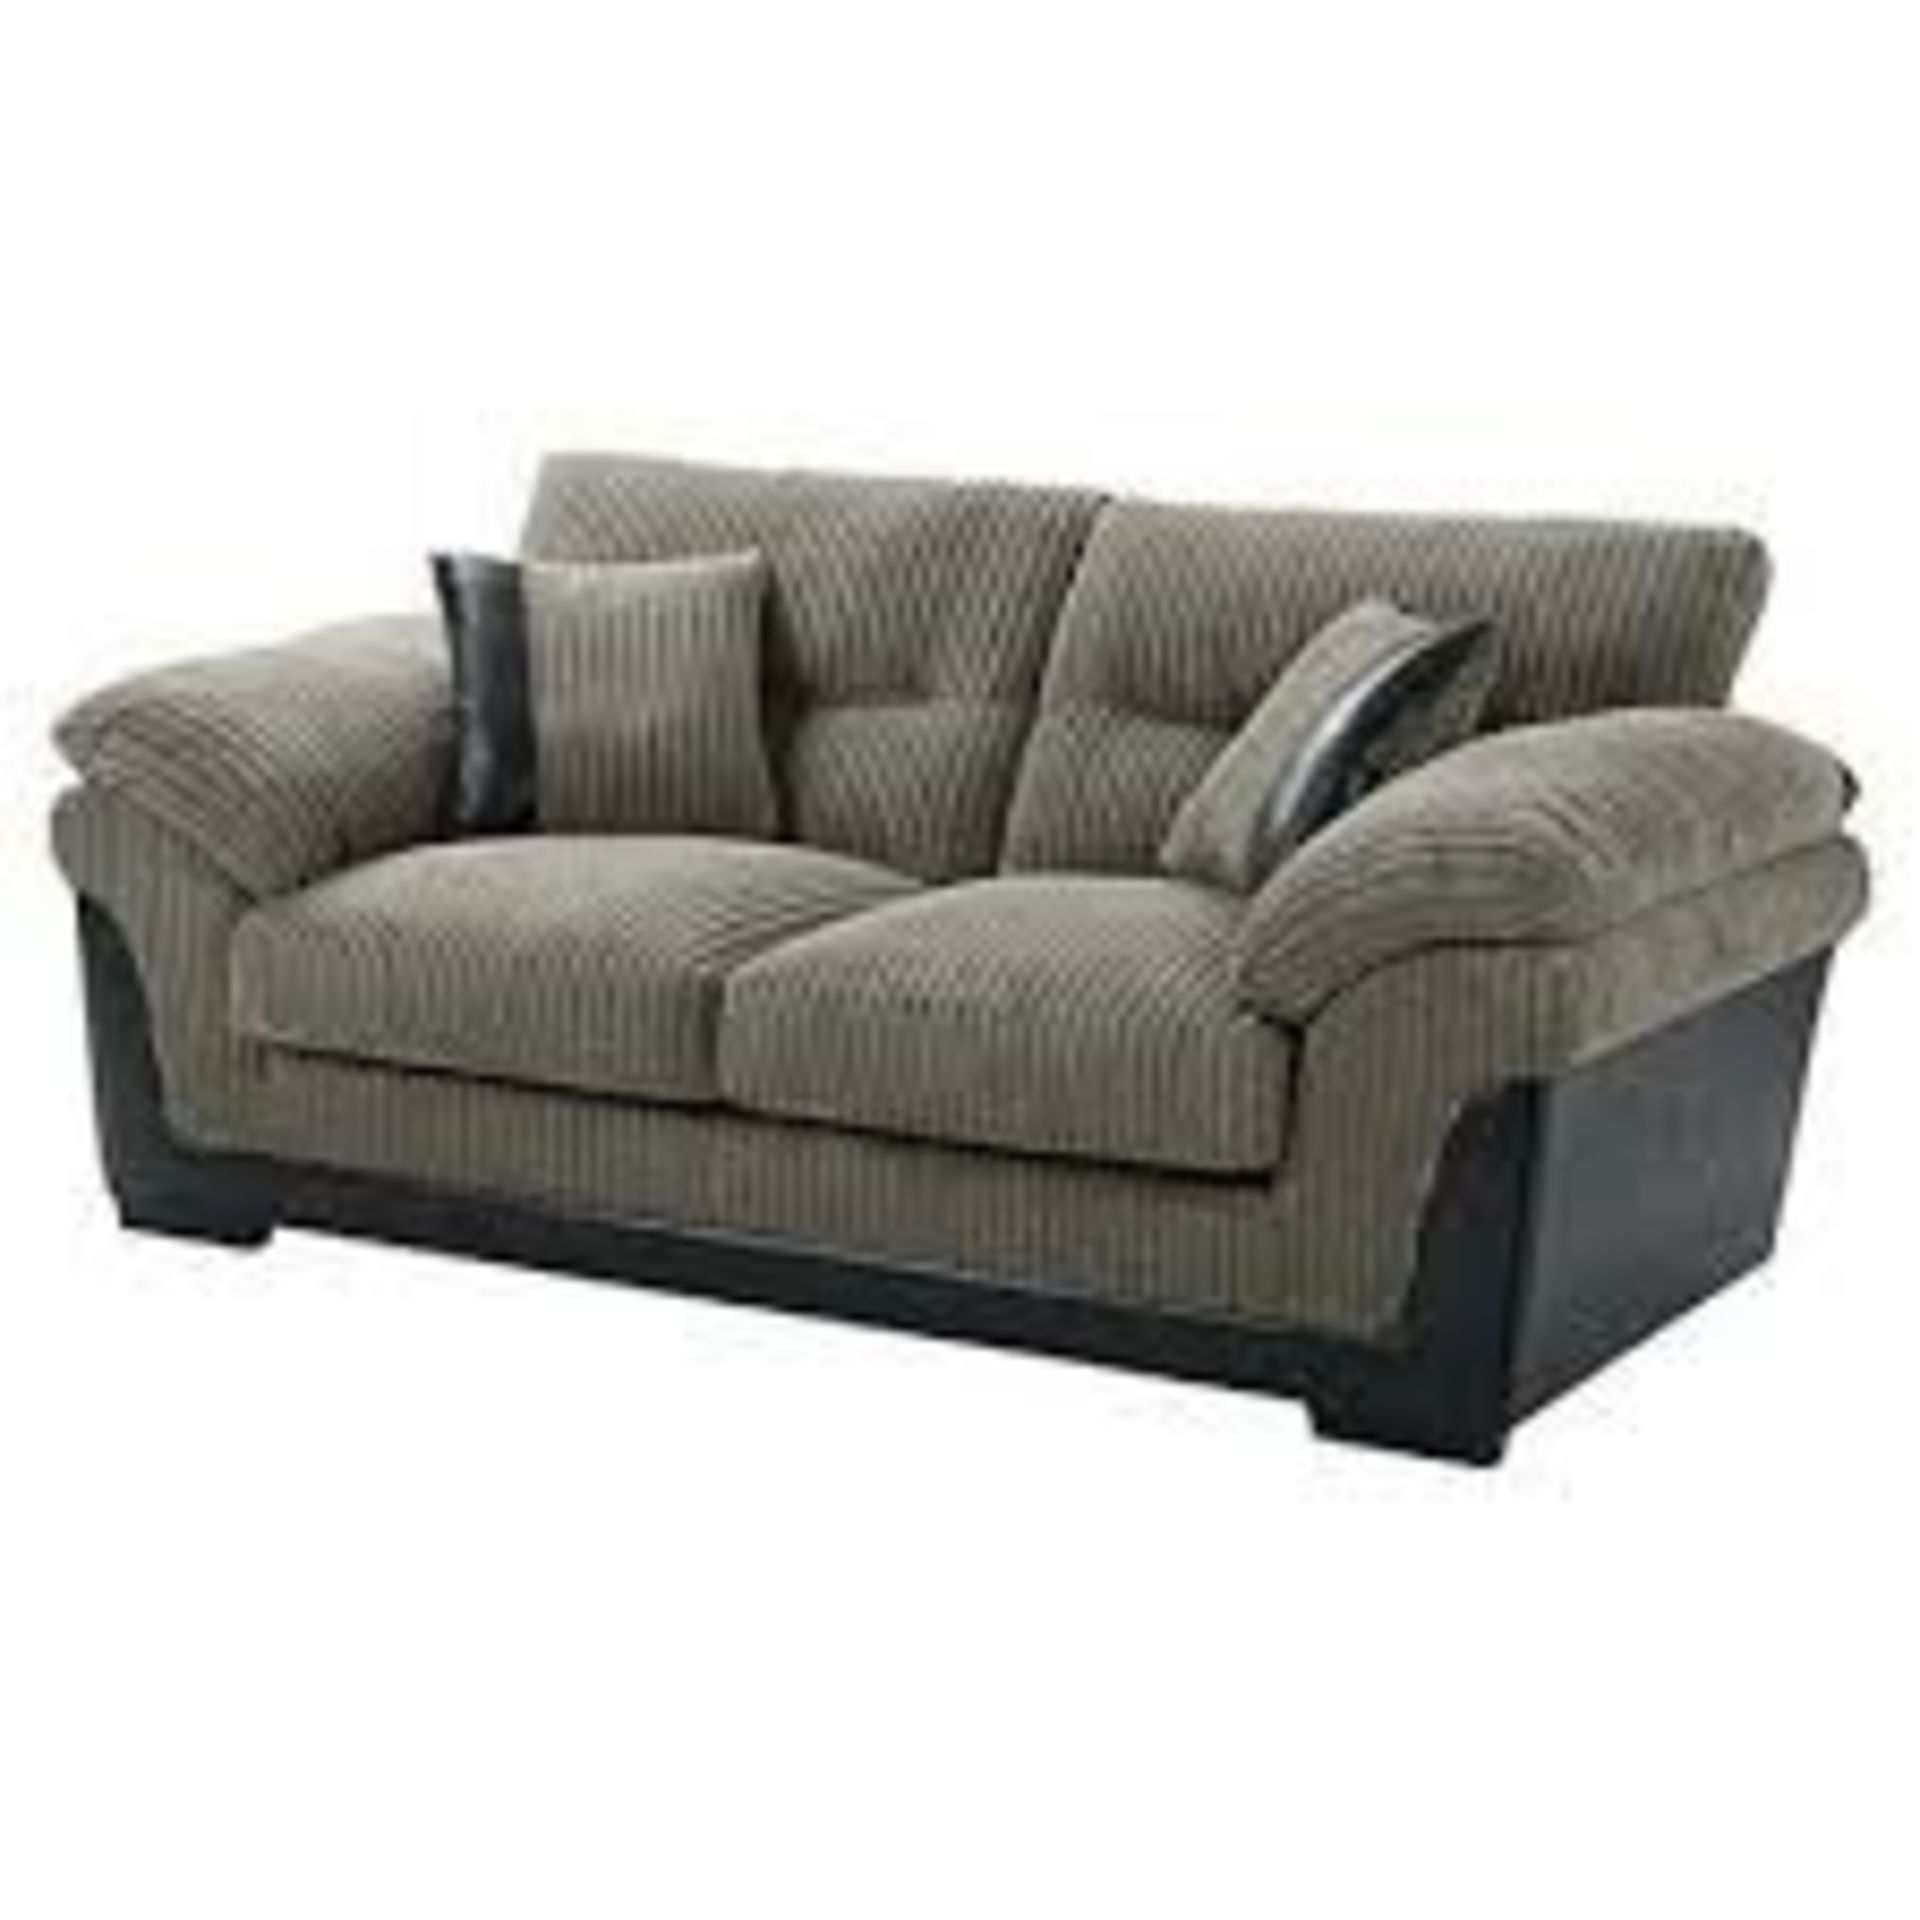 1 BRAND NEW BAGGED KENDAL 2.5 SEATER JUMBO CORD SOFA IN CHARCOAL (VIEWING HIGHLY RECOMMENDED)